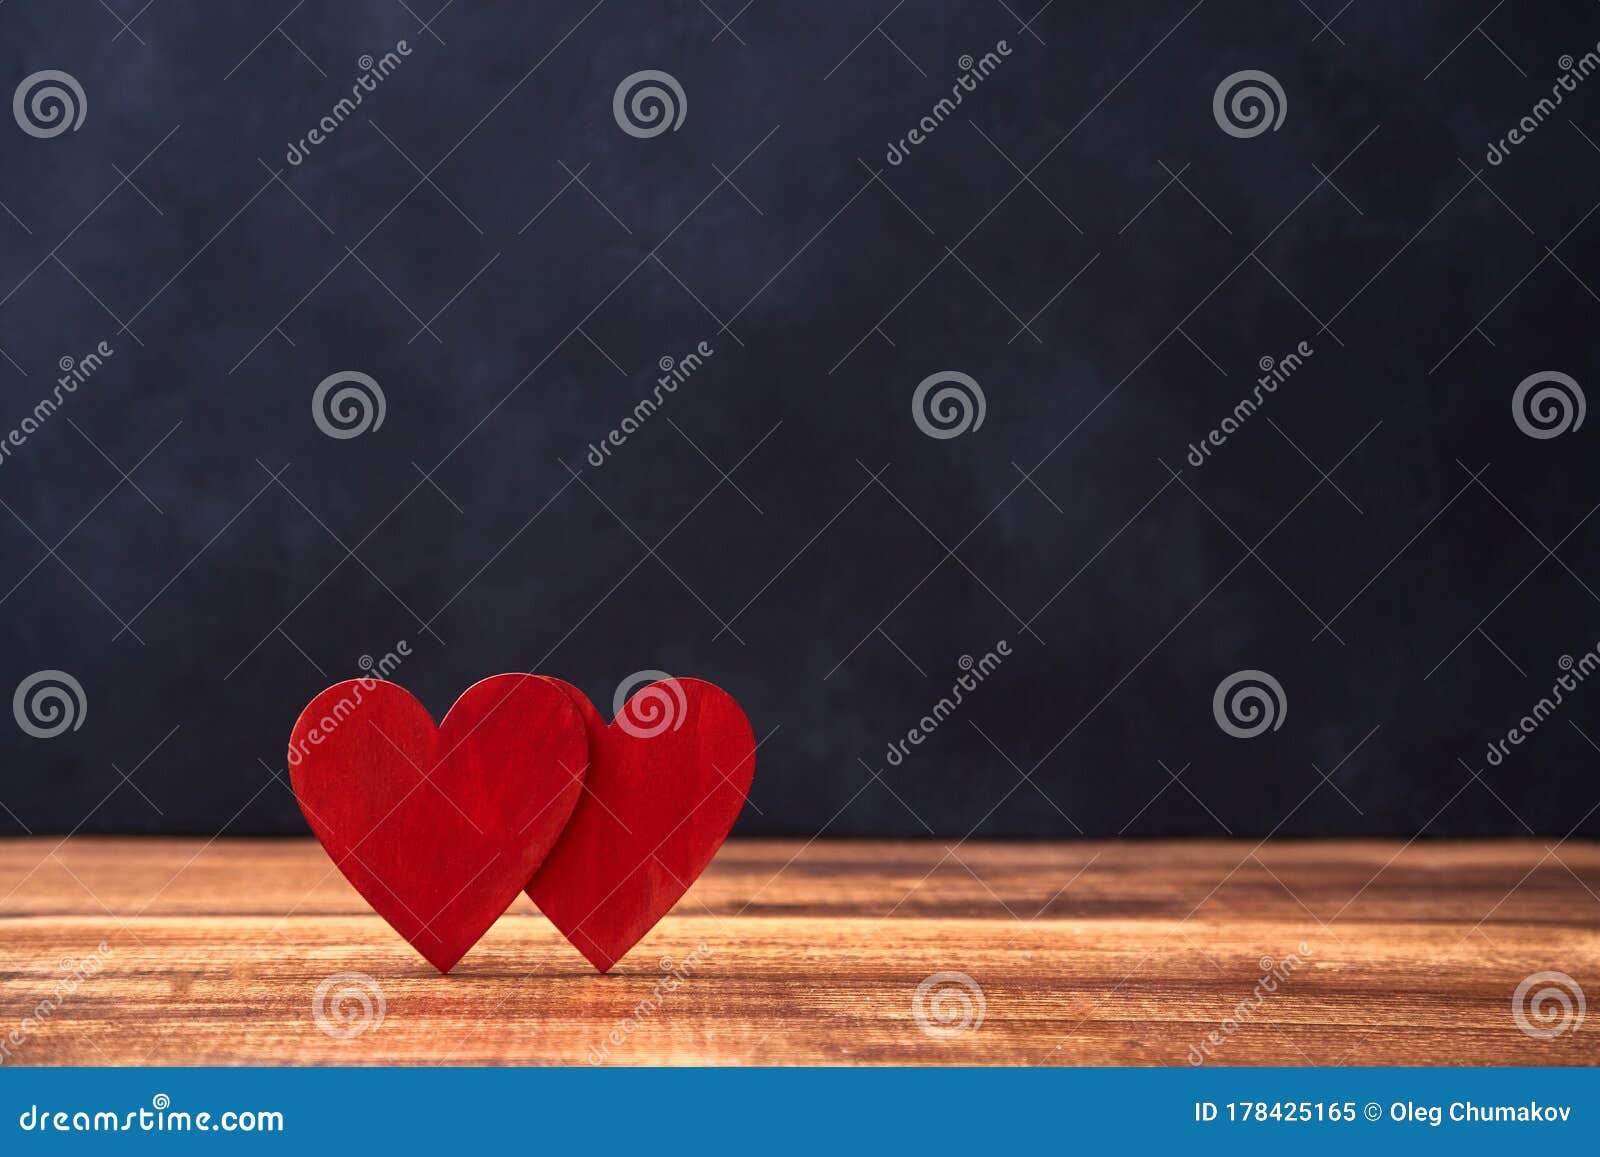 love and relationship. saint valentines day mockup. couple in love. amour, fondness. two red hearts on dark backdrop